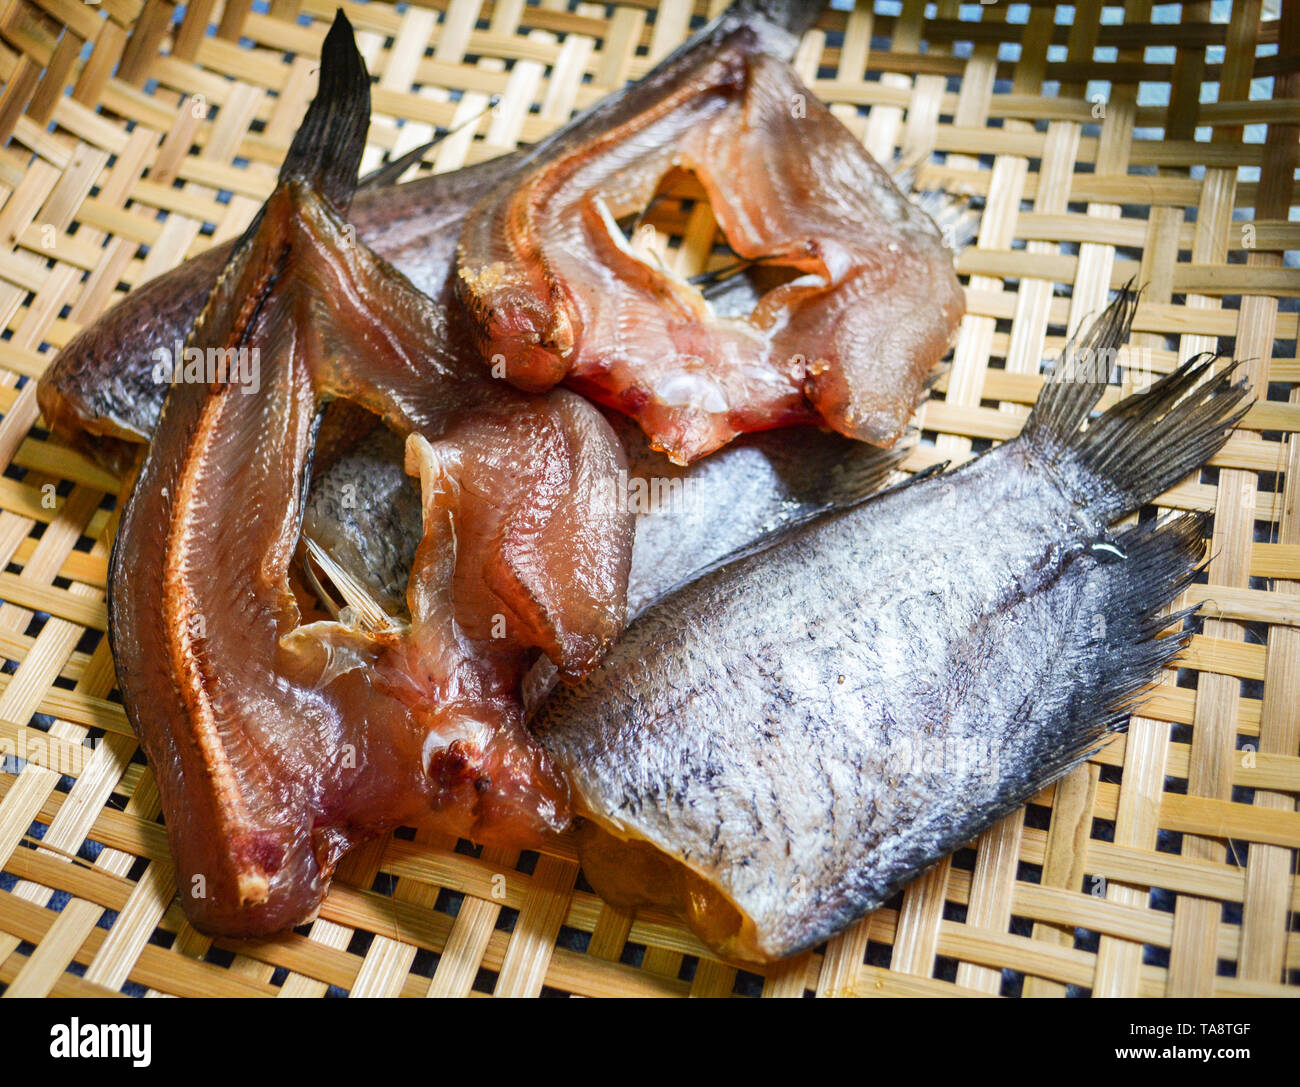 Sun dried fish / trichogaster pectoralis fish and striped snakehead fish dry on bamboo basket Stock Photo